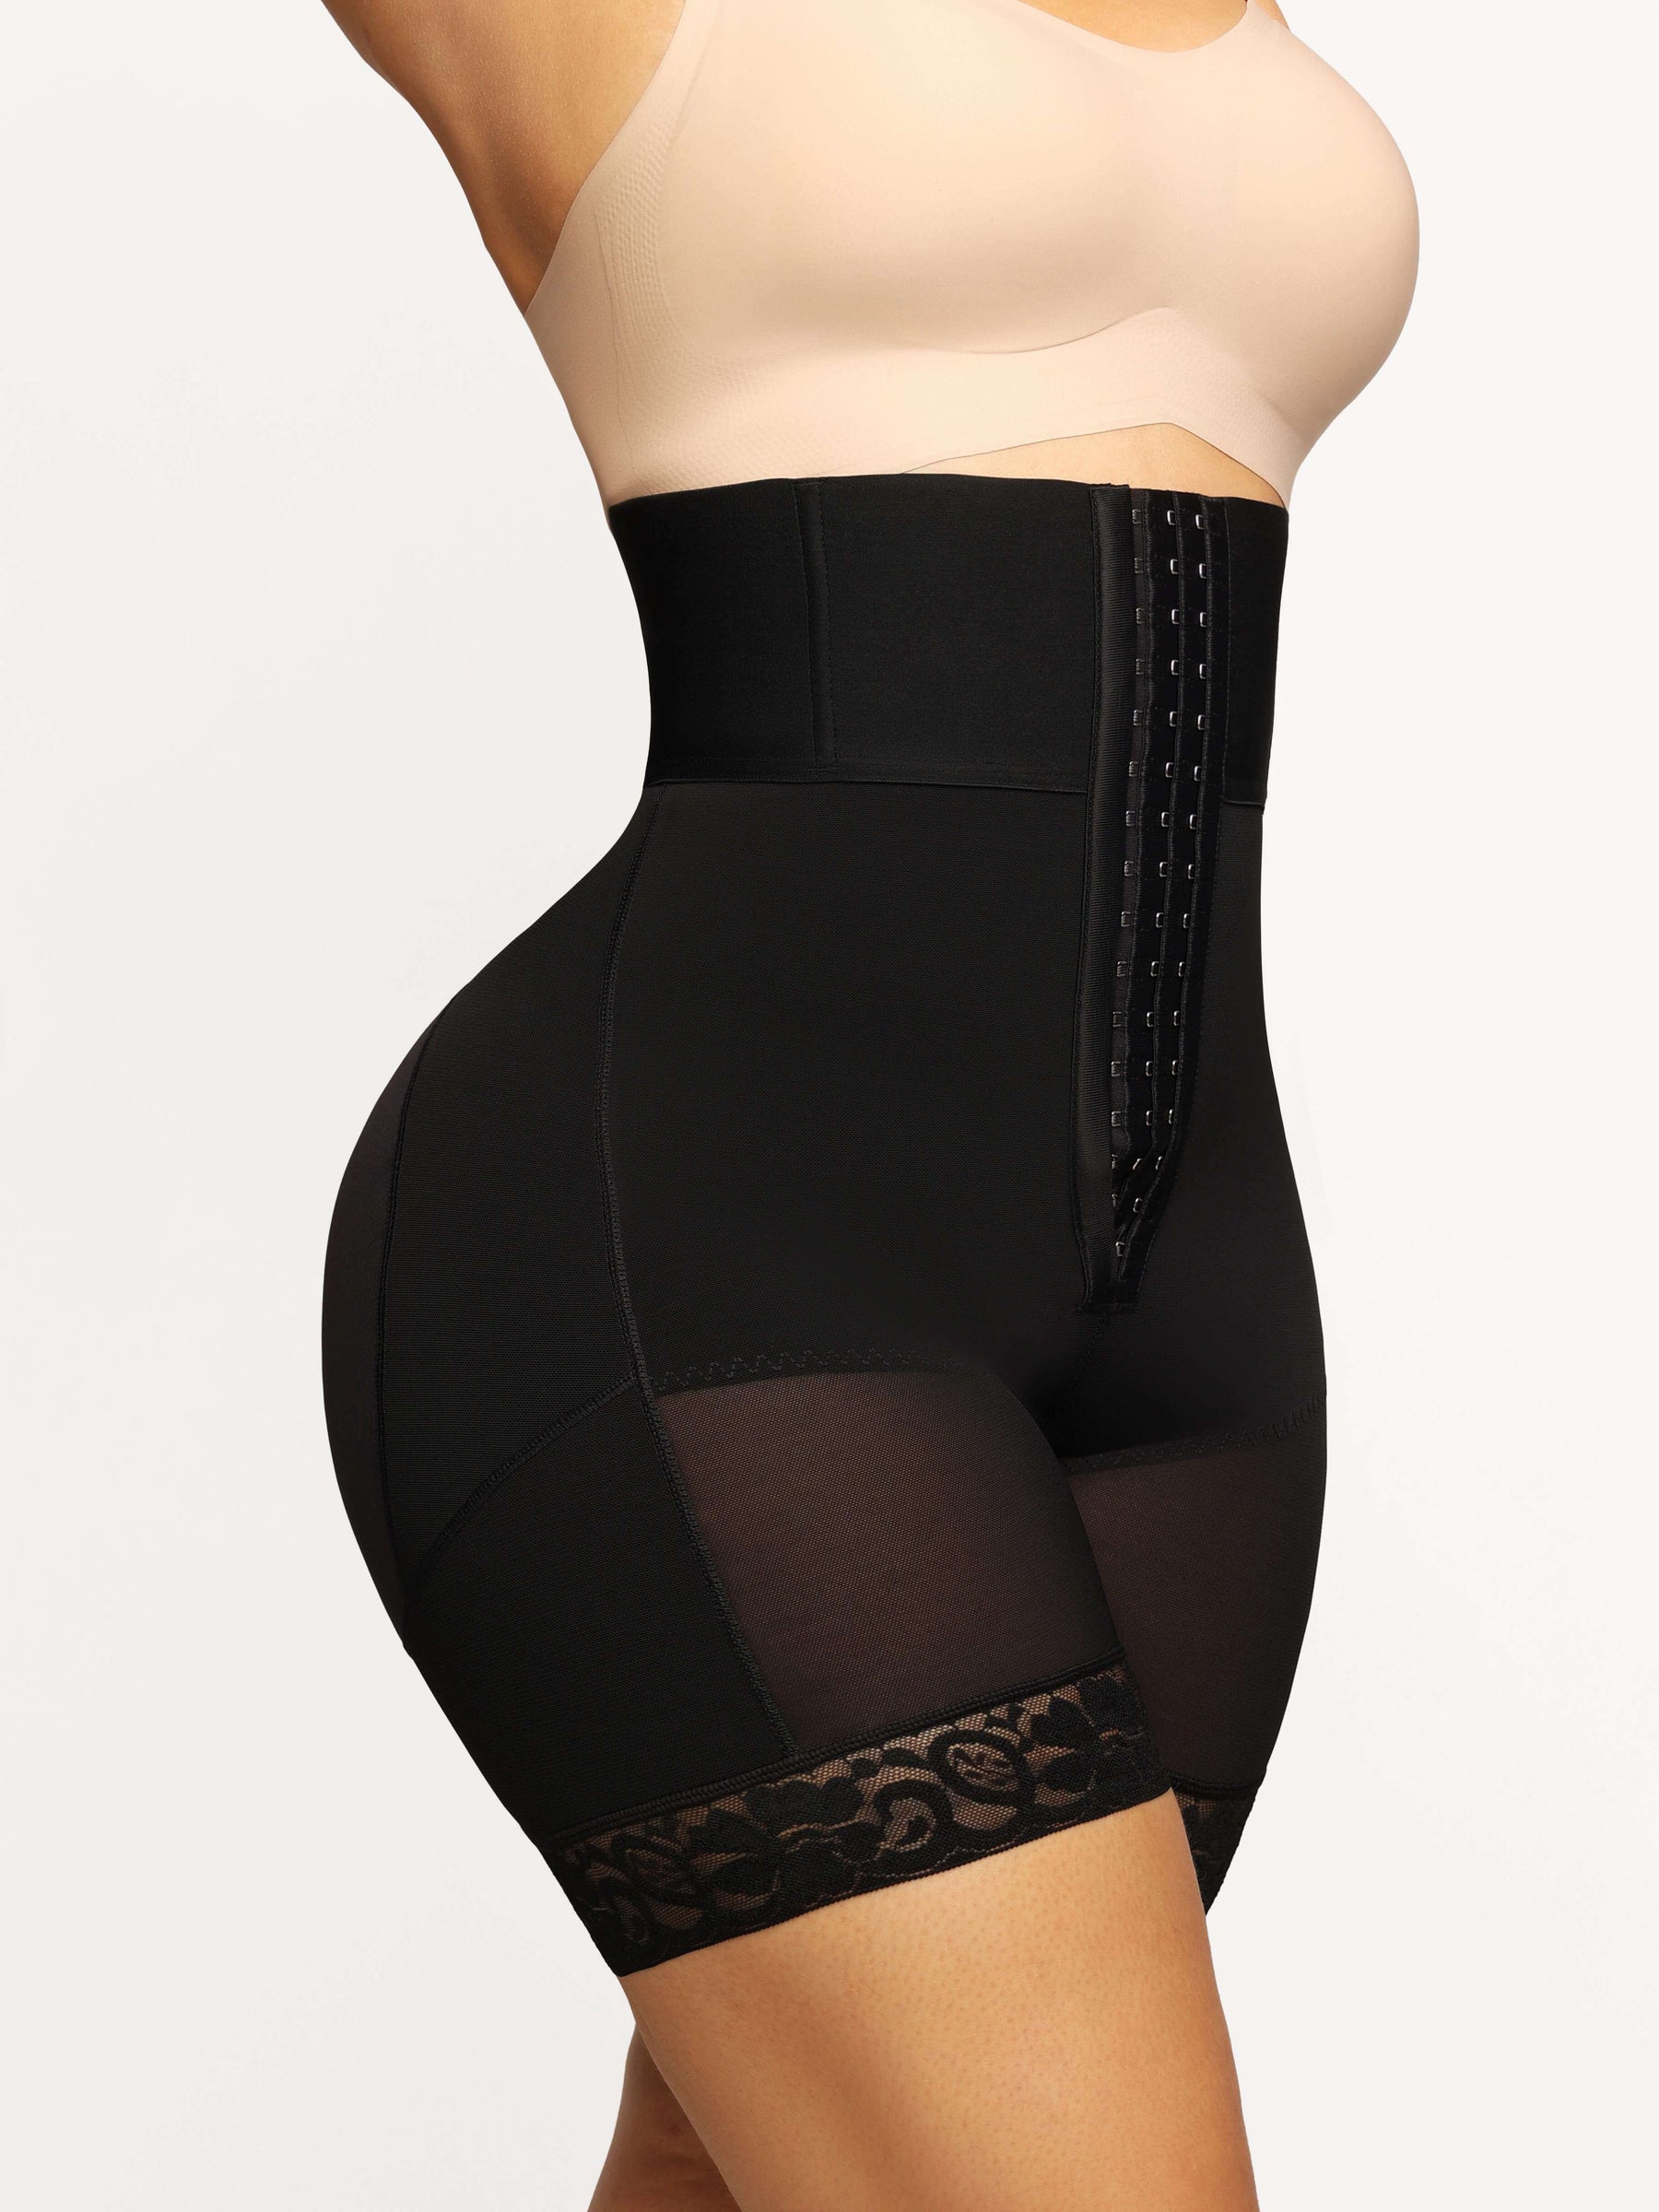 $34 for a Set of 2 Slim N' Lift Aire High-Waist Leg Shapers from Thane  Direct Canada (a $69 Value) 